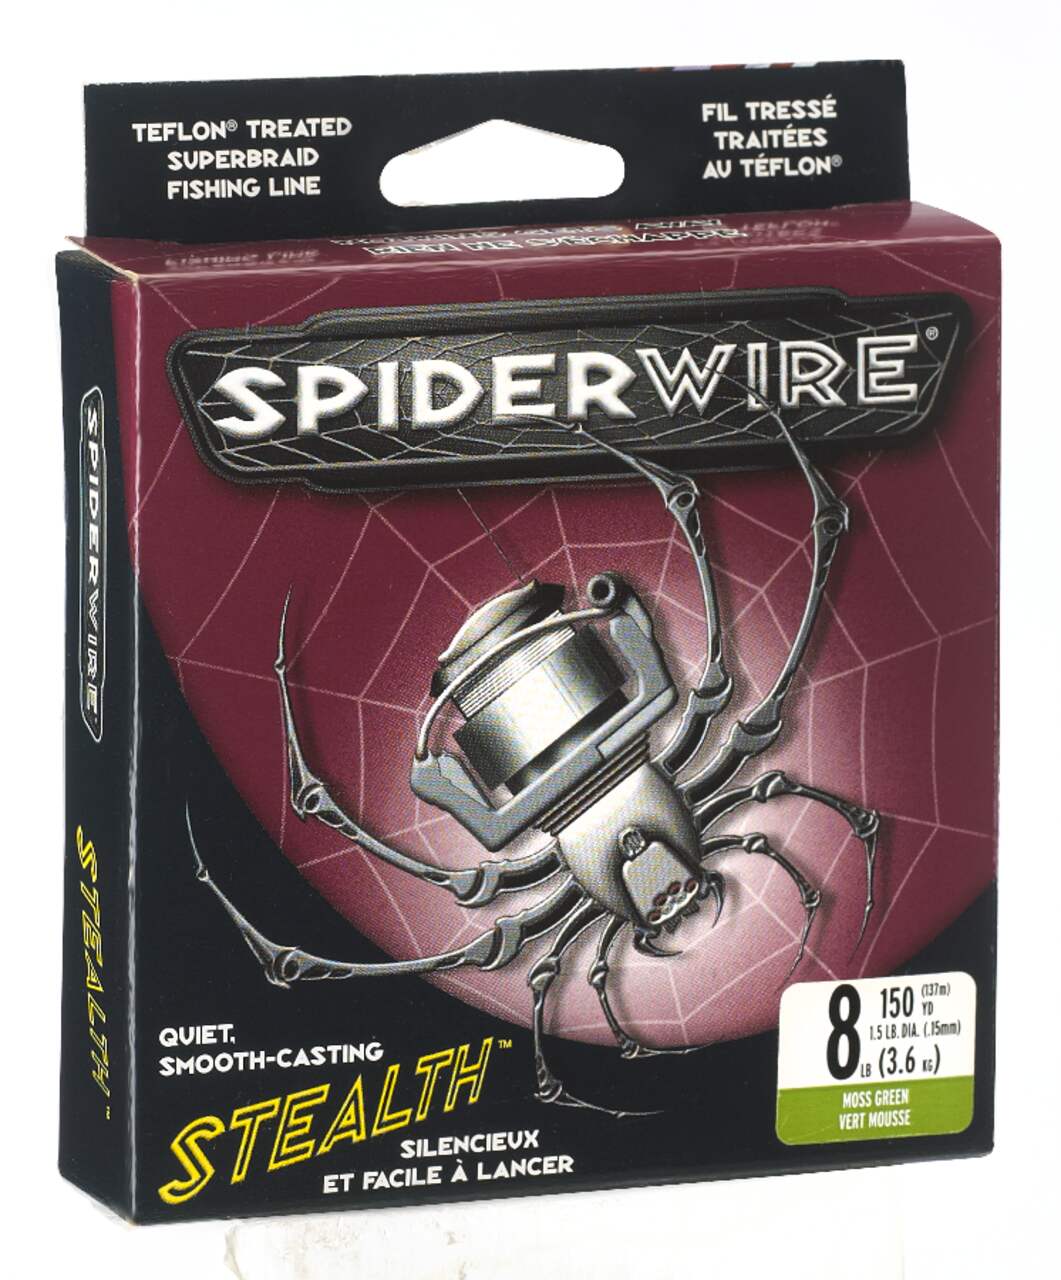 https://media-www.canadiantire.ca/product/playing/fishing/fishing-accessories/0784564/spiderwire-stealth-braid-moss-green-8lb-125-yards-32032cba-395c-4bb5-b3f5-50b8cd68d799.png?imdensity=1&imwidth=640&impolicy=mZoom